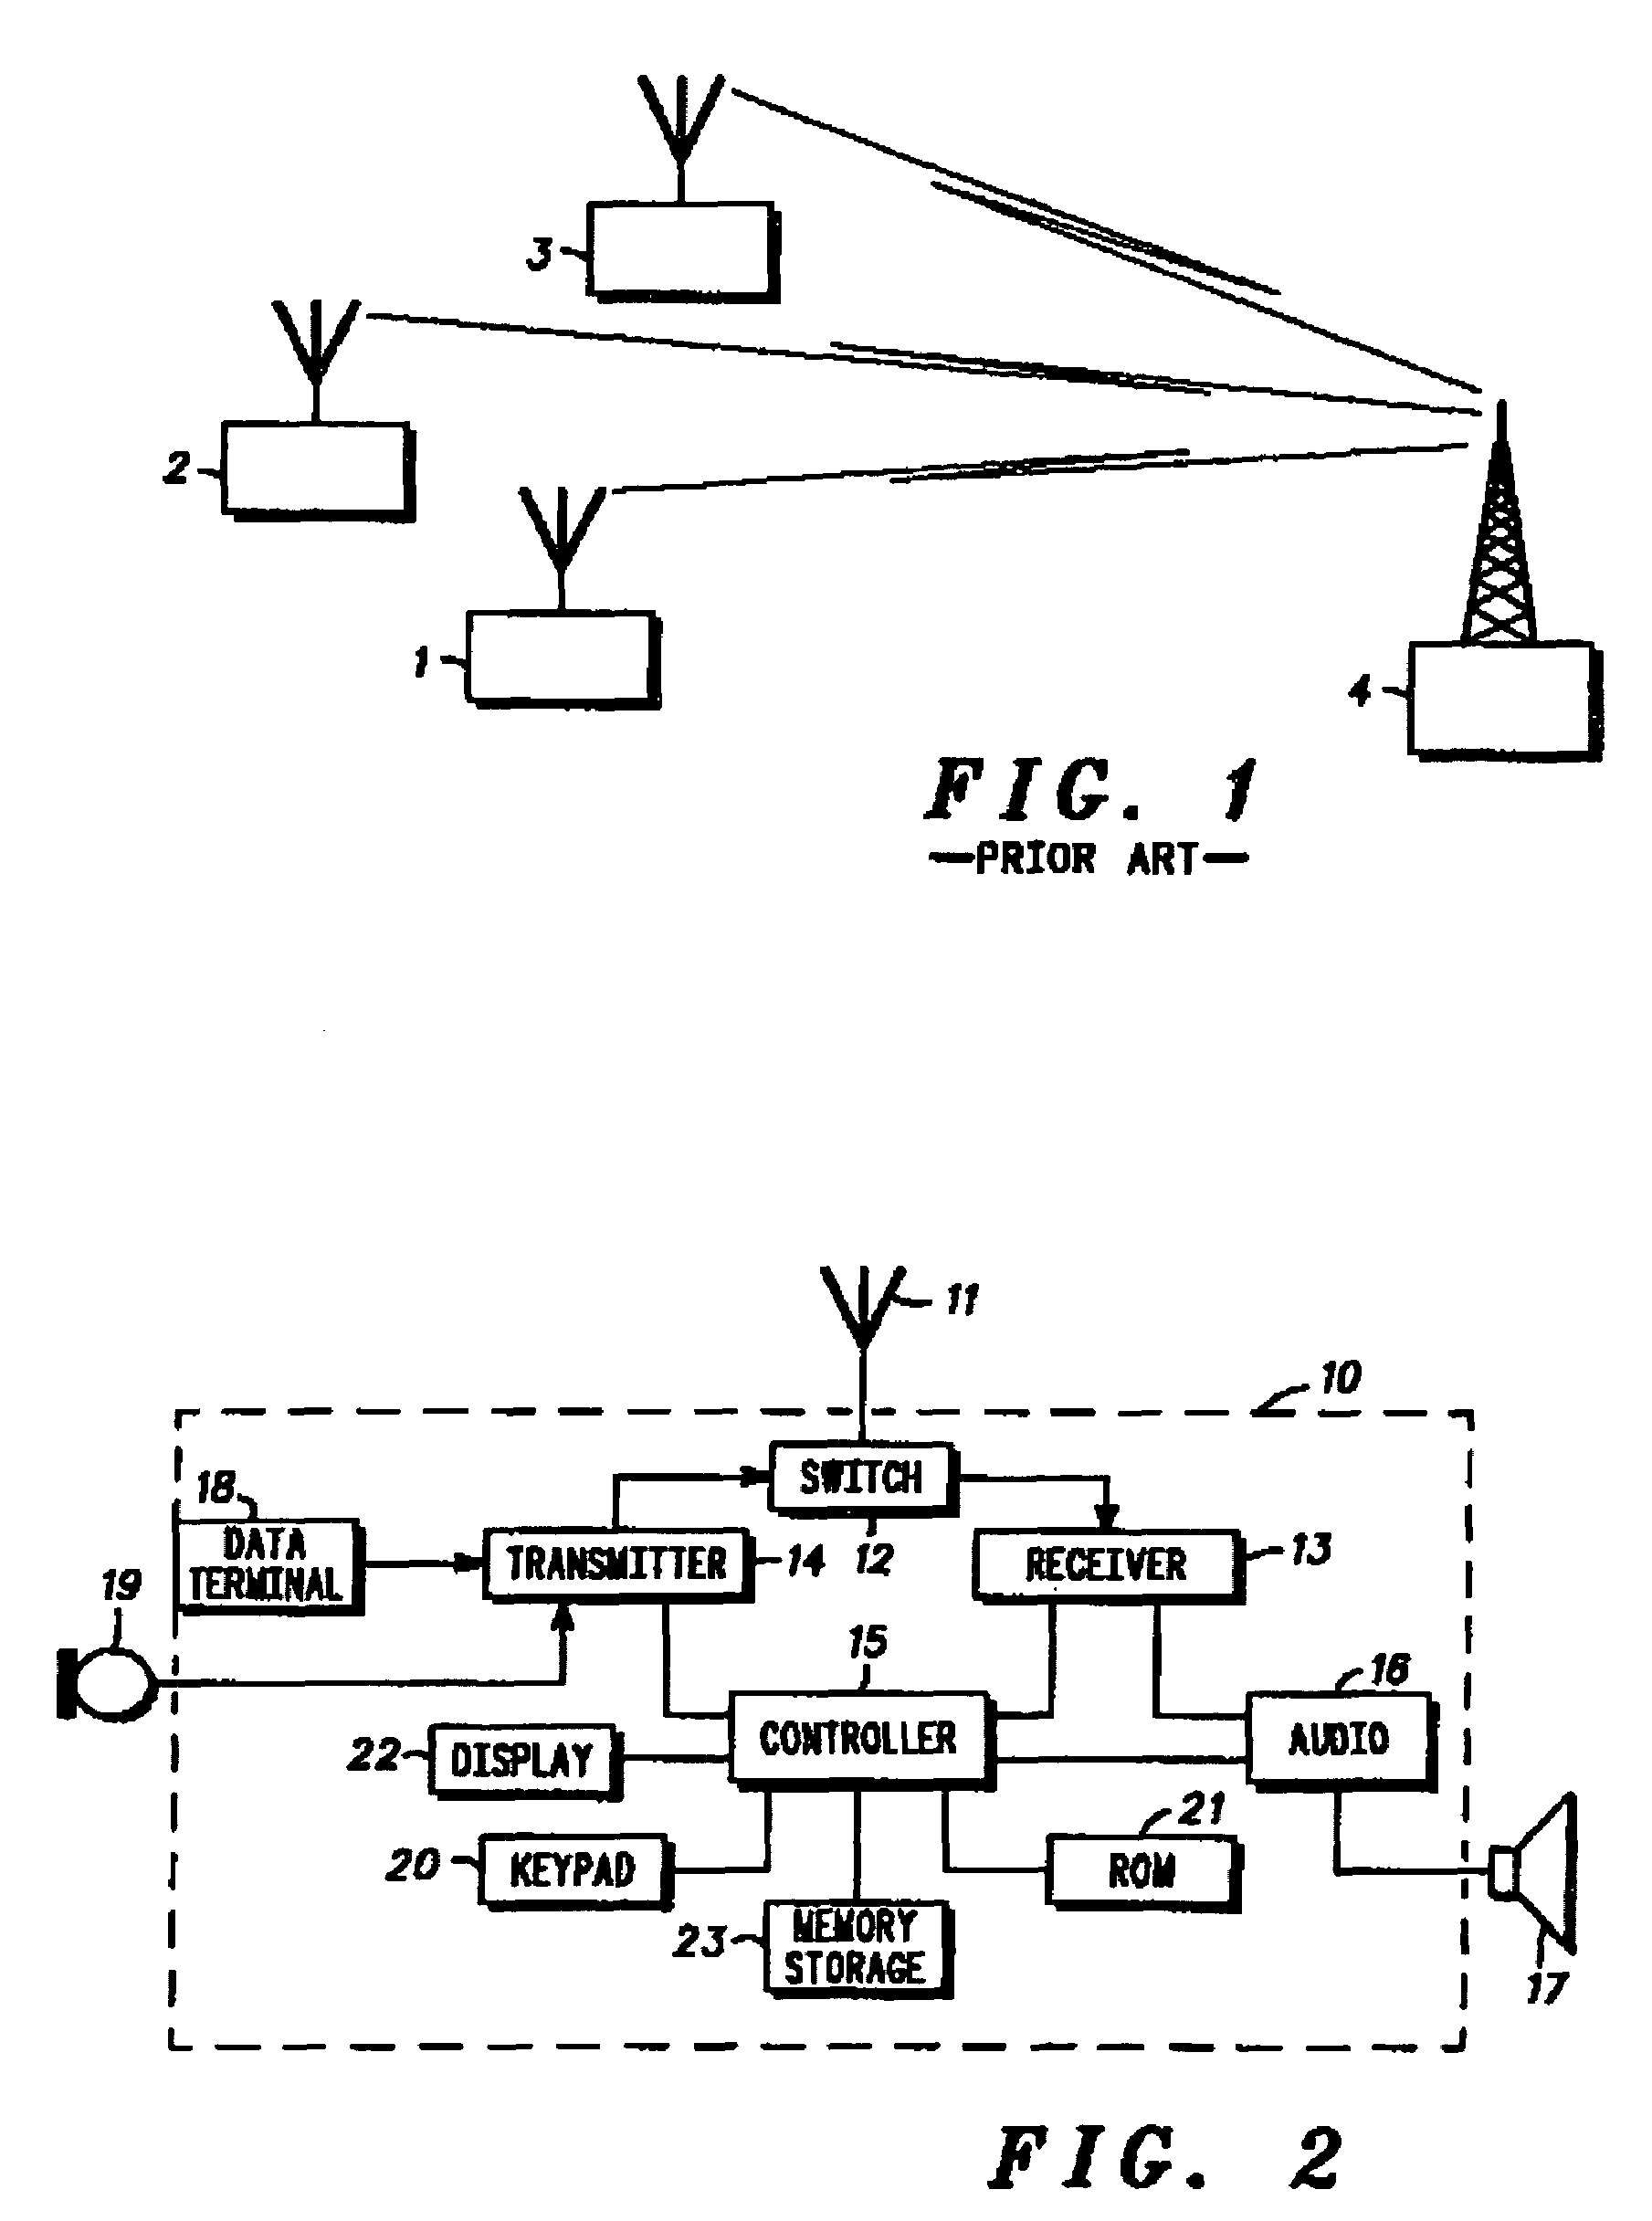 Method and system for communicating using a quiescent period